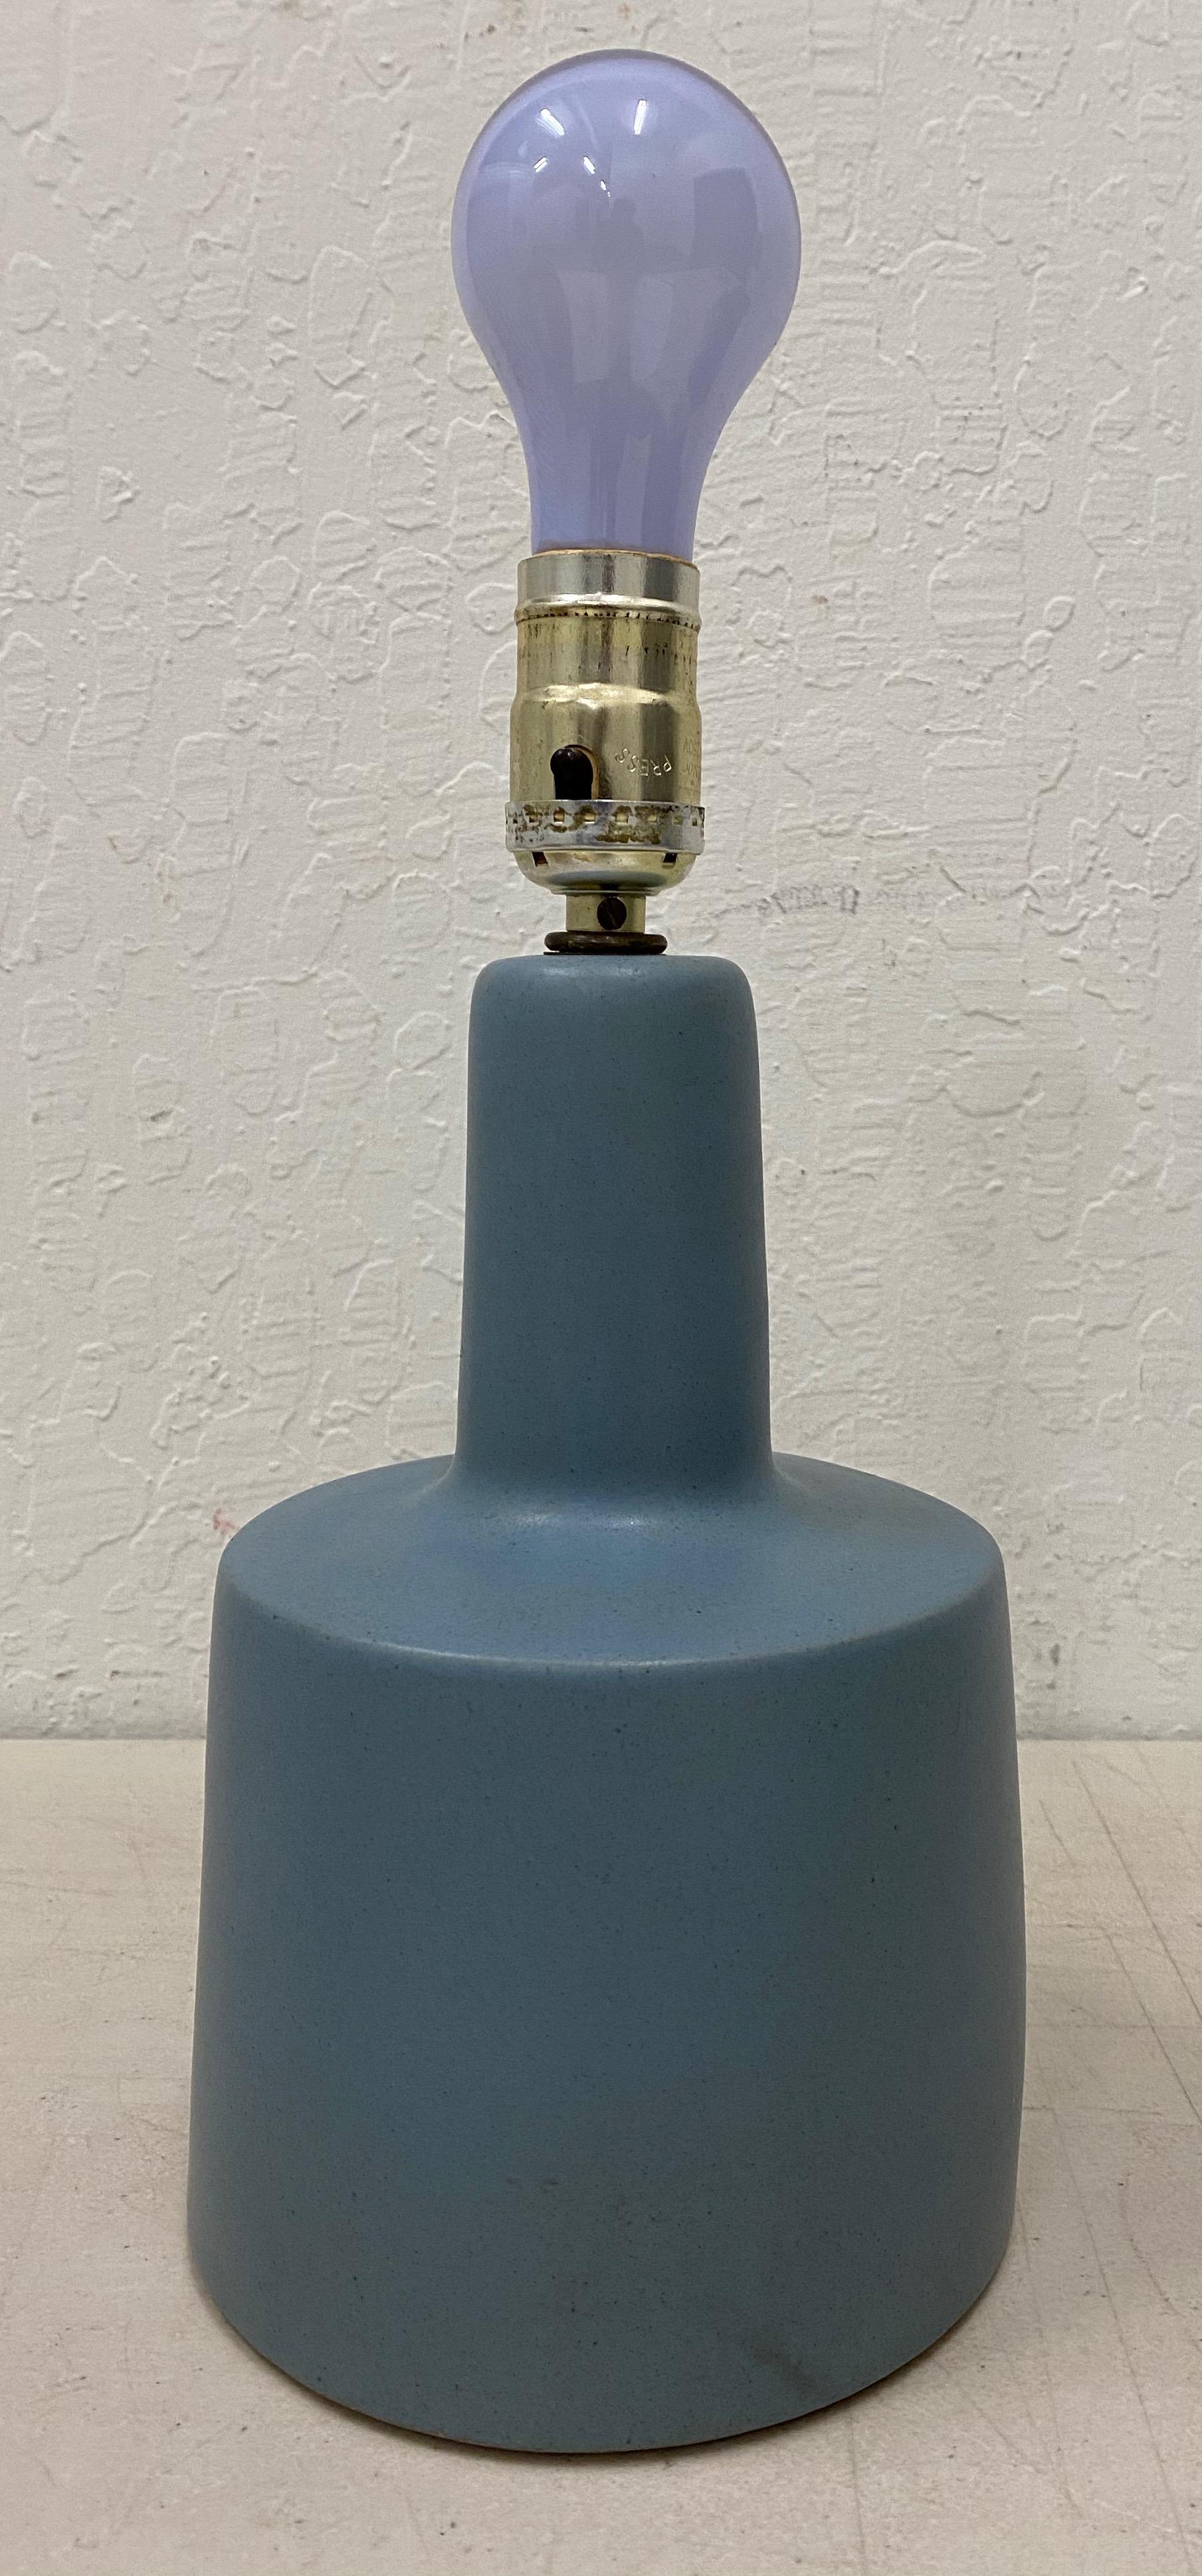 Jane & Gordon Martz periwinkle blue table lamp, circa 1960

Fine Mid-Century Modern table lamp by Jane & Gordon Martz.

A fantastic periwinkle blue color. The lamp is signed at the base.

Dimensions: 6